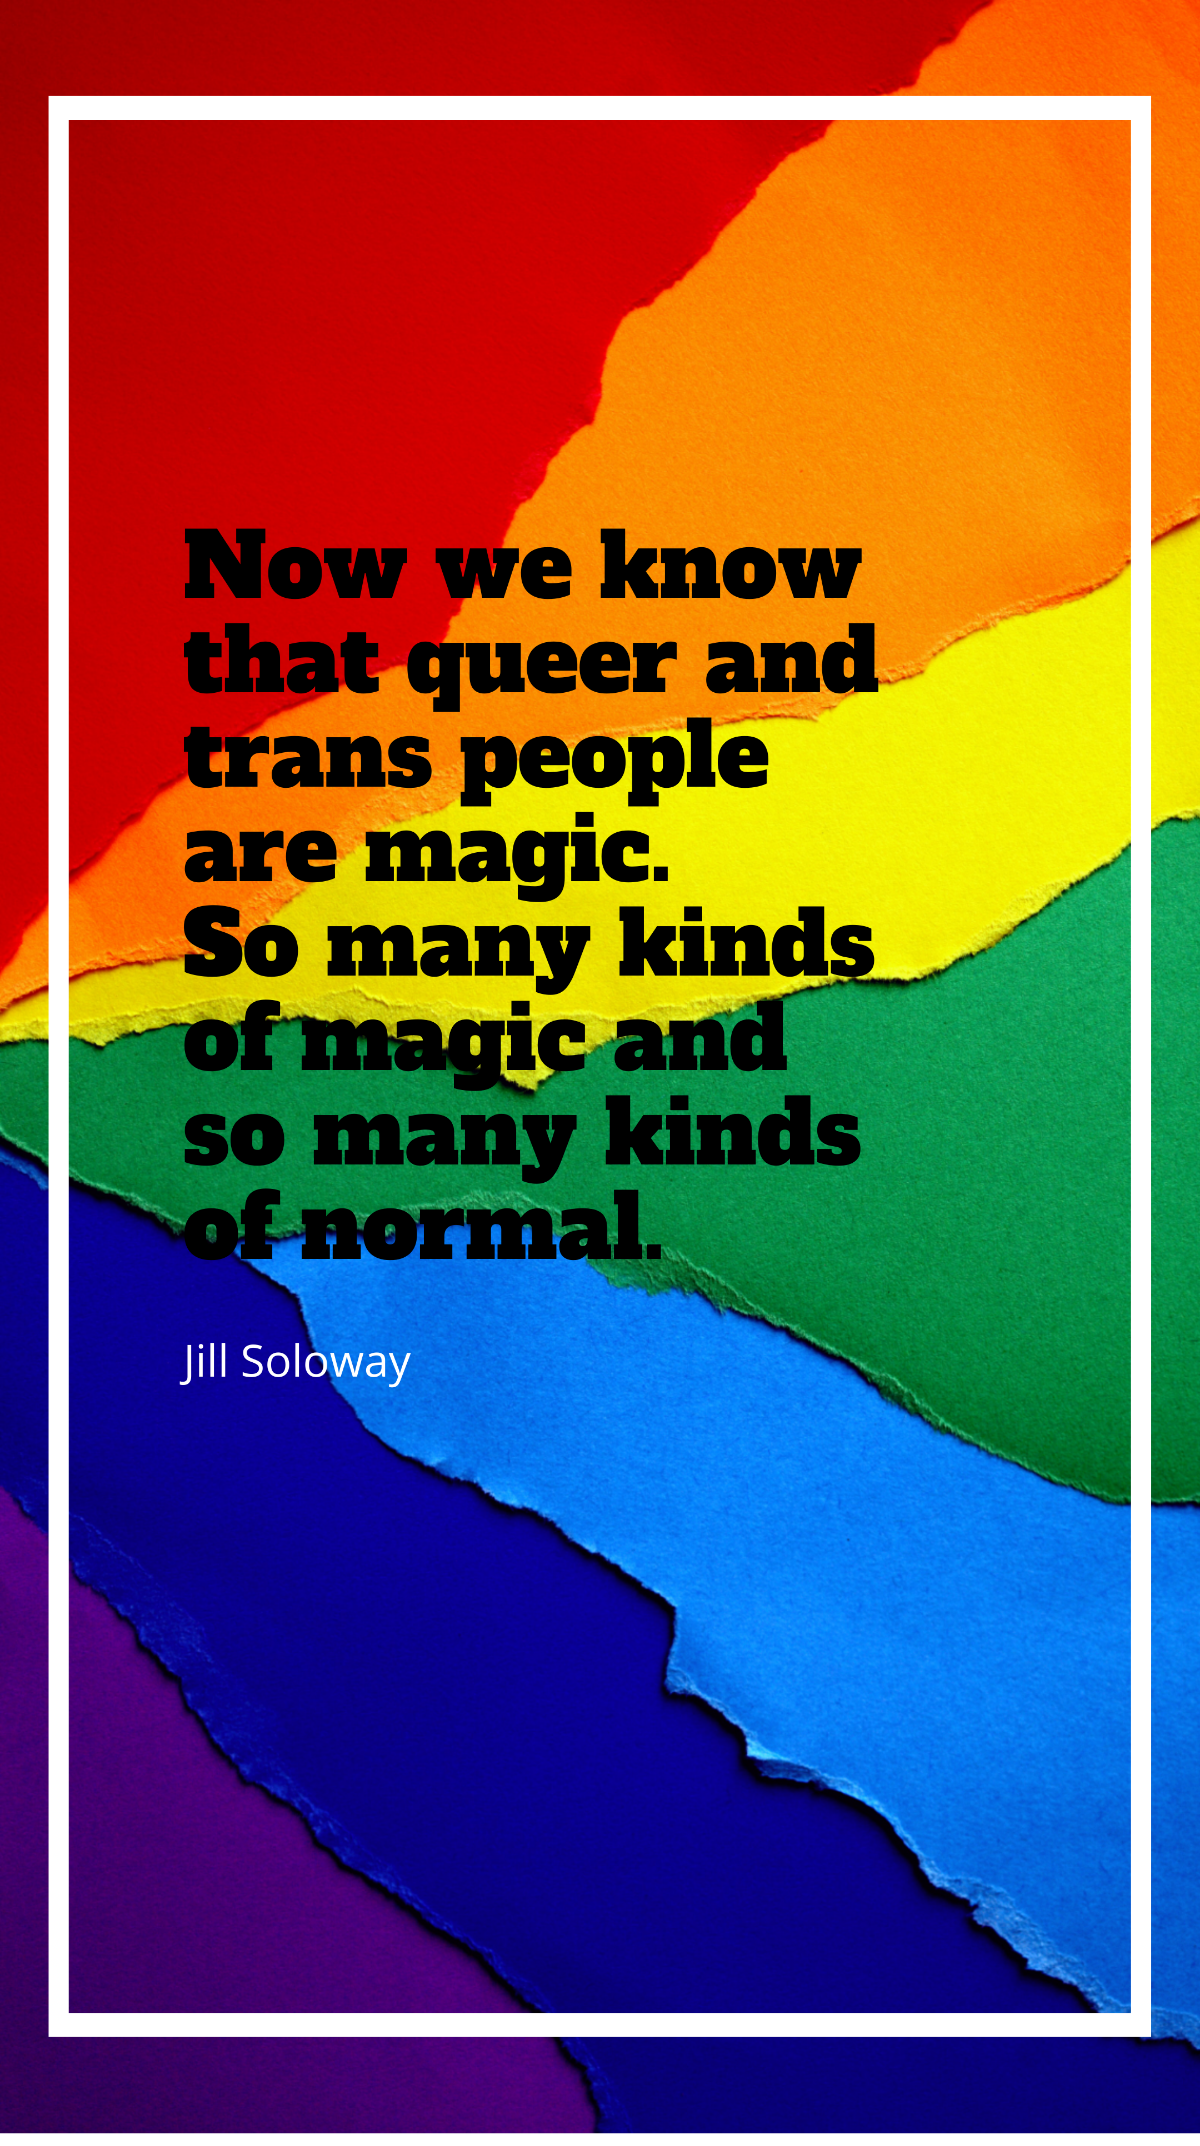 Jill Soloway - Now we know that queer and trans people are magic. So many kinds of magic and so many kinds of normal. Template